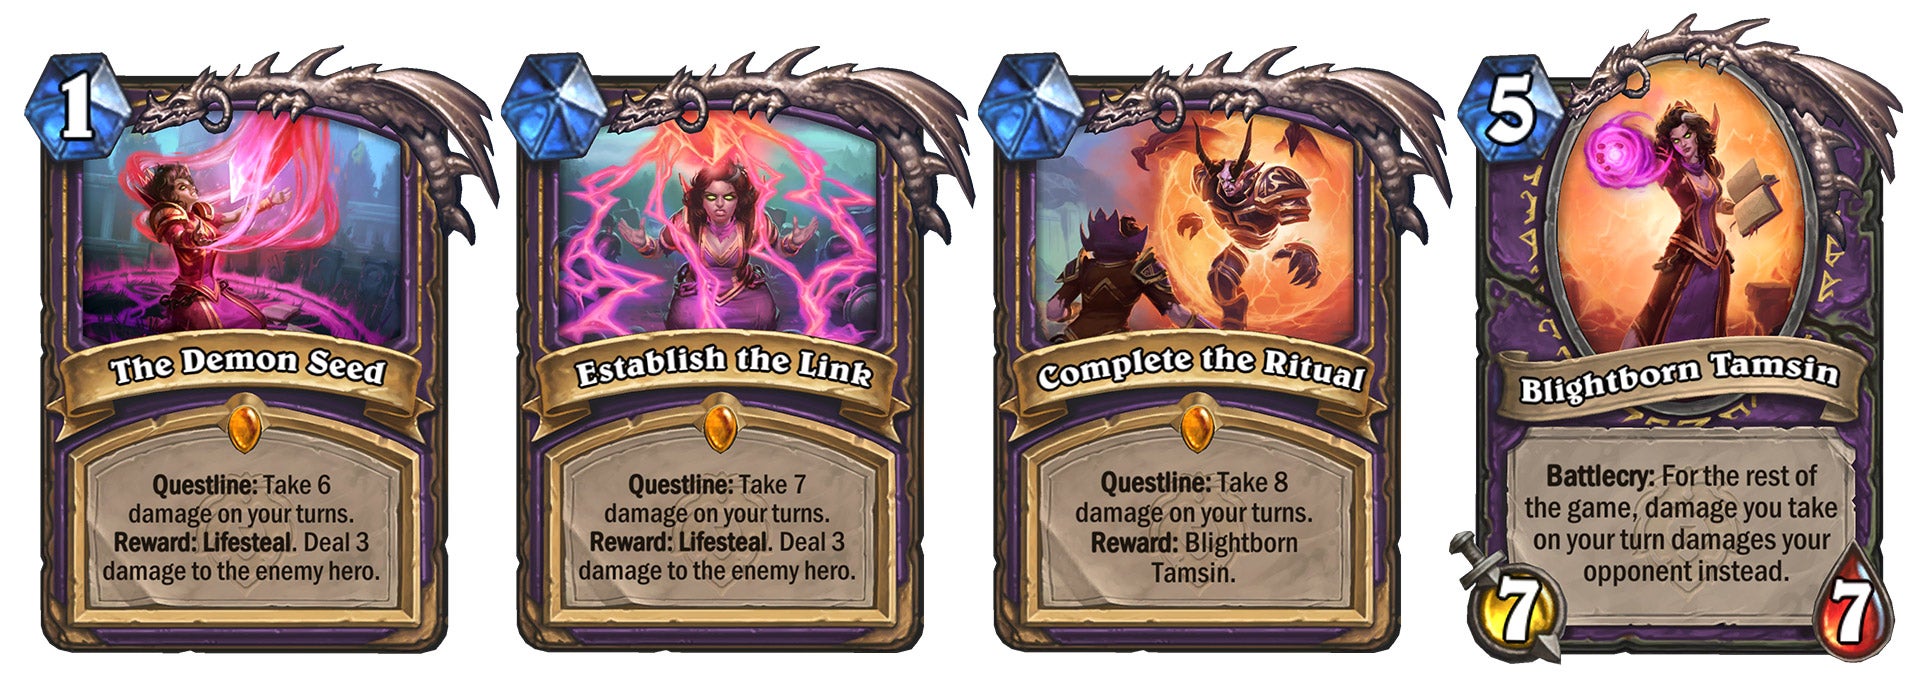 Warlock's new Questline represents another appealing direction for the class.